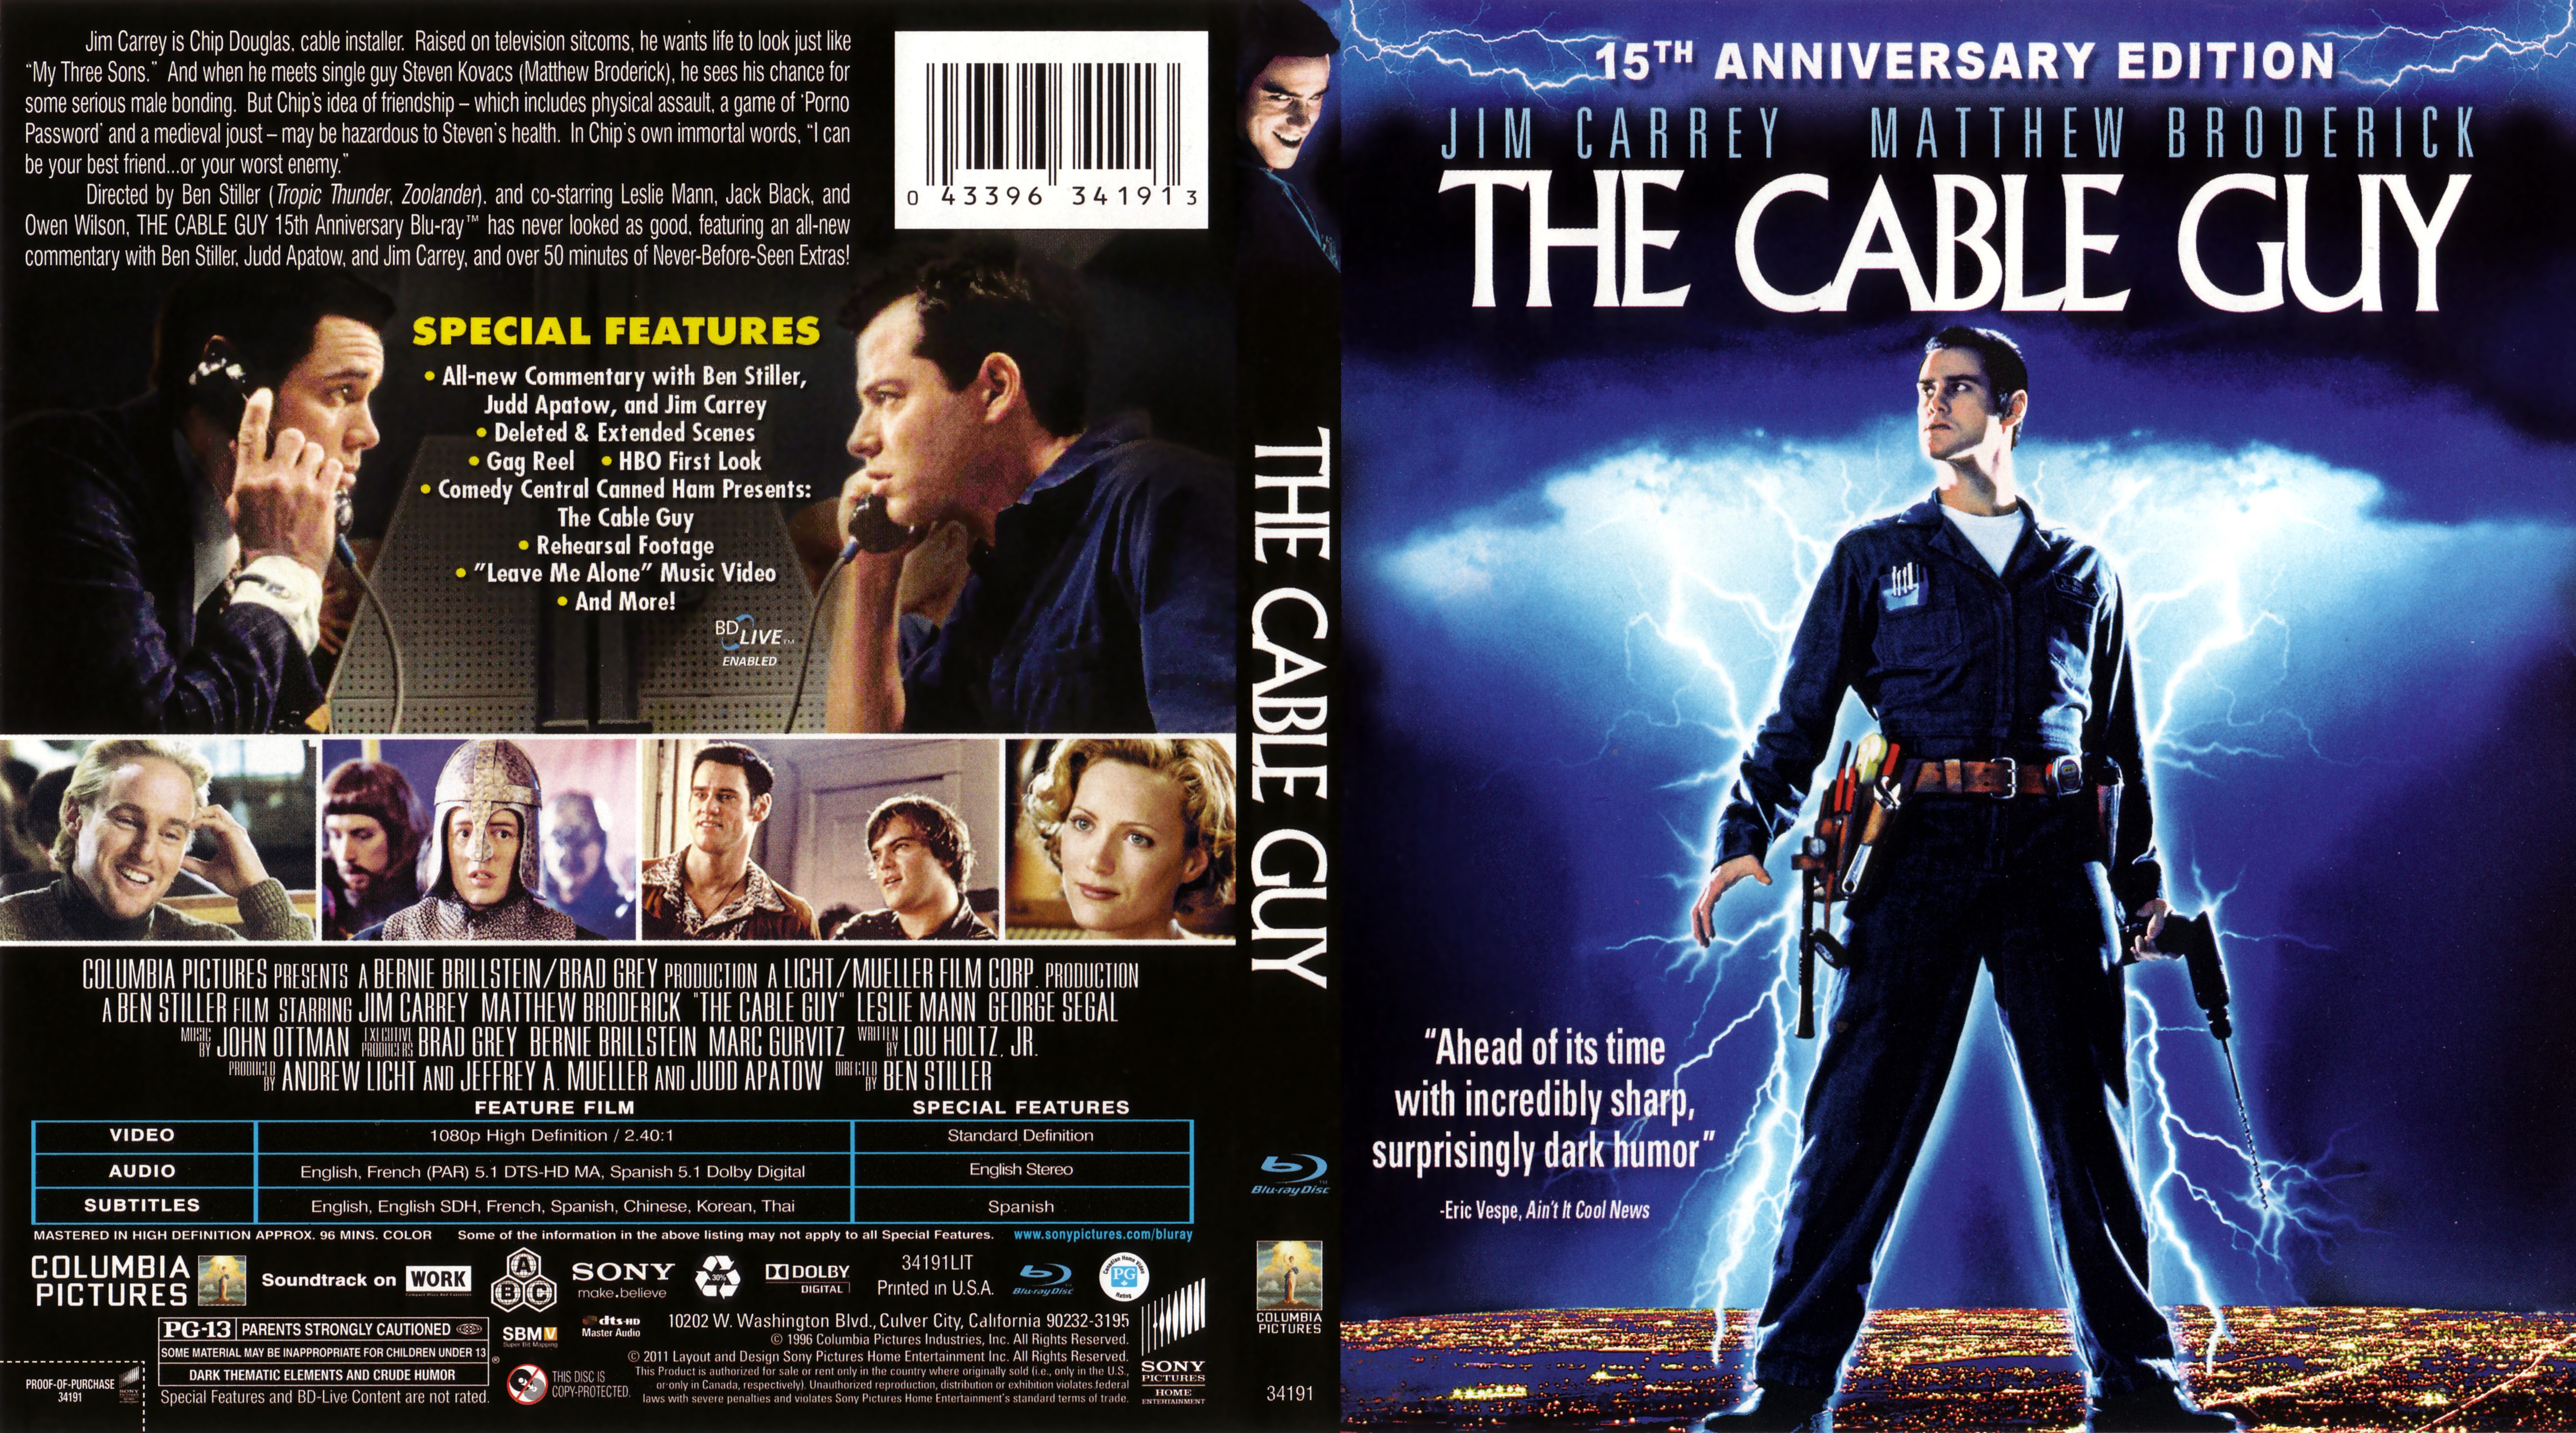 Jaquette DVD The cable guy - Disjonct Zone 1 (BLU-RAY)